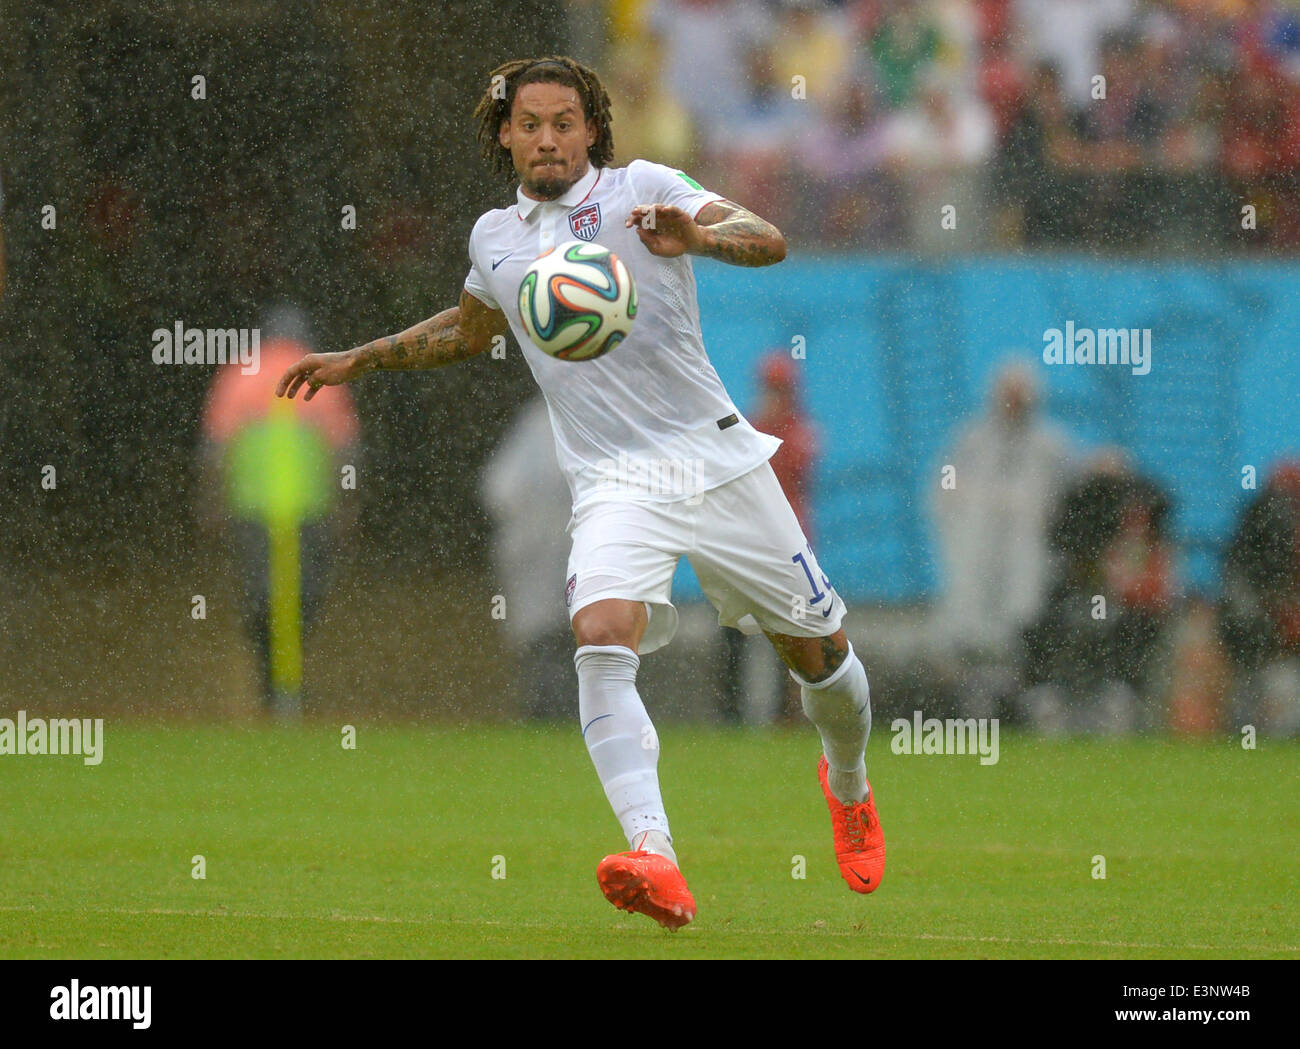 Recife, Brazil. 26th June, 2014. Jermaine Jones of the US during the FIFA World Cup group G preliminary round match between the USA and Germany at Arena Pernambuco in Recife, Brazil, 26 June 2014. Photo: Thomas Eisenhuth/dpa/Alamy Live News Stock Photo